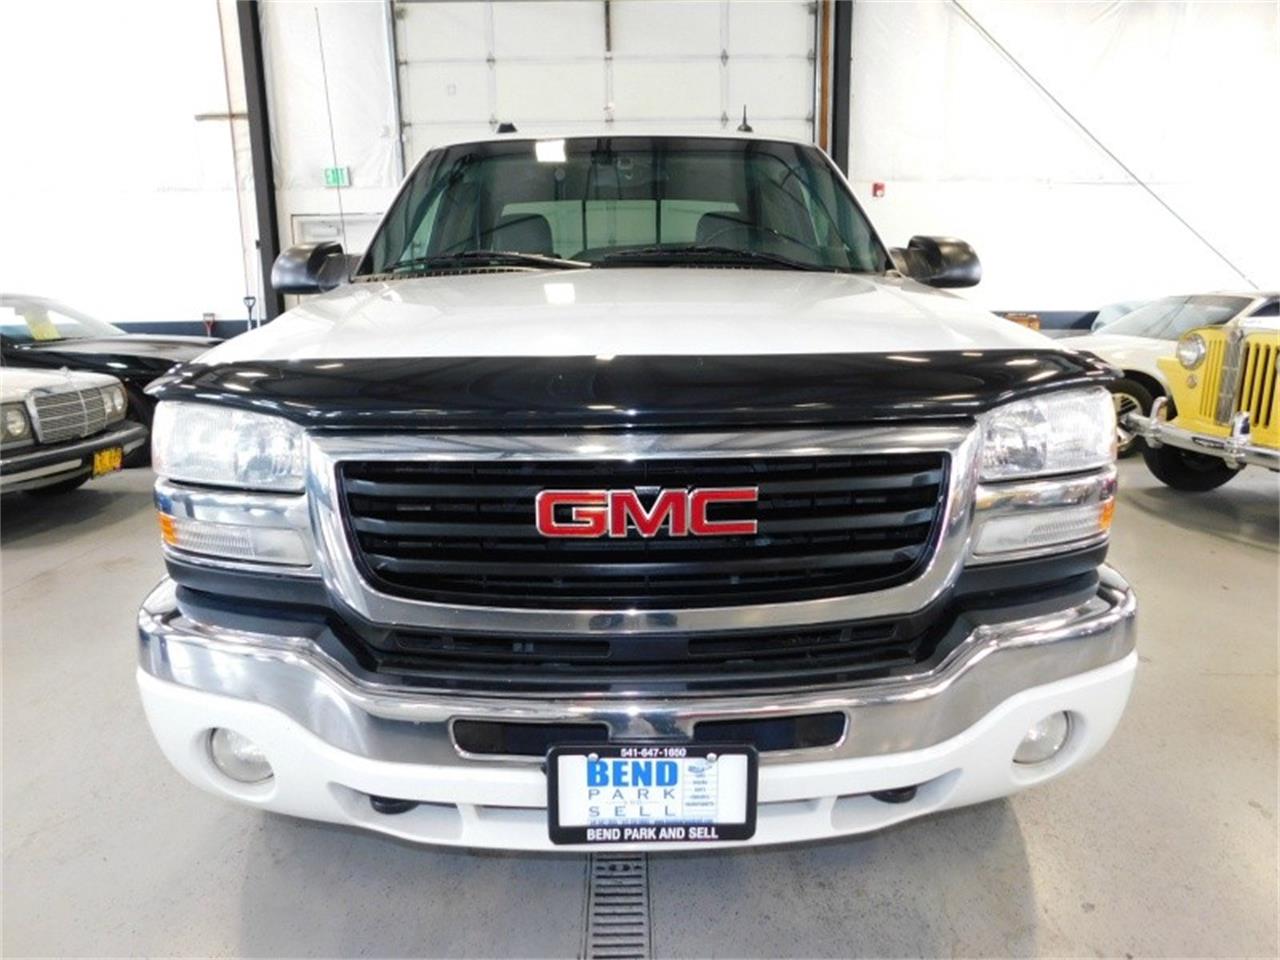 2005 GMC 2500 for sale in Bend, OR